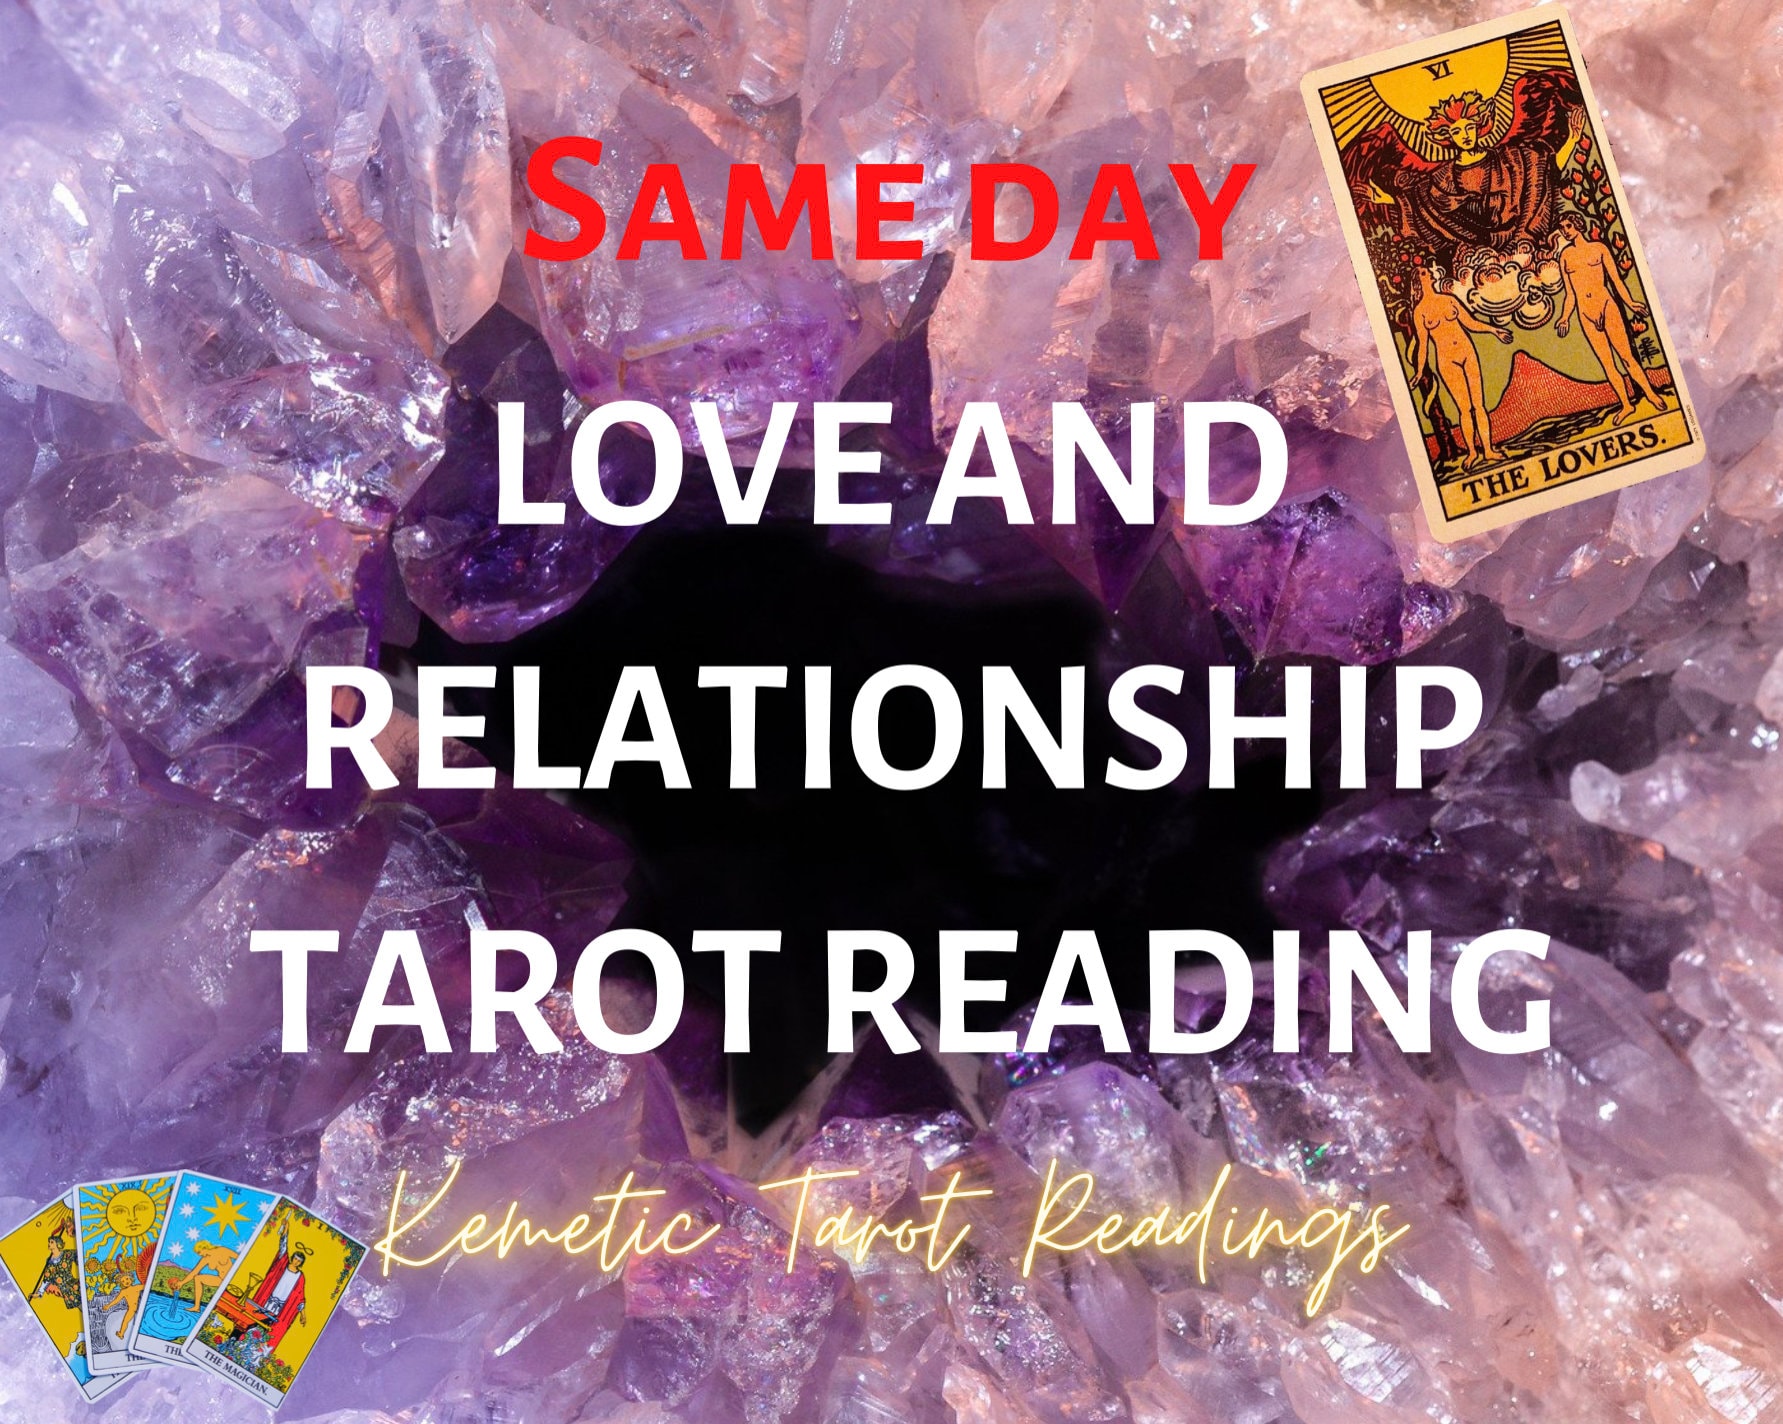 Erhverv hyppigt Uegnet SAME DAY Love Tarot Reading 4questions 1 FREE Question - Etsy